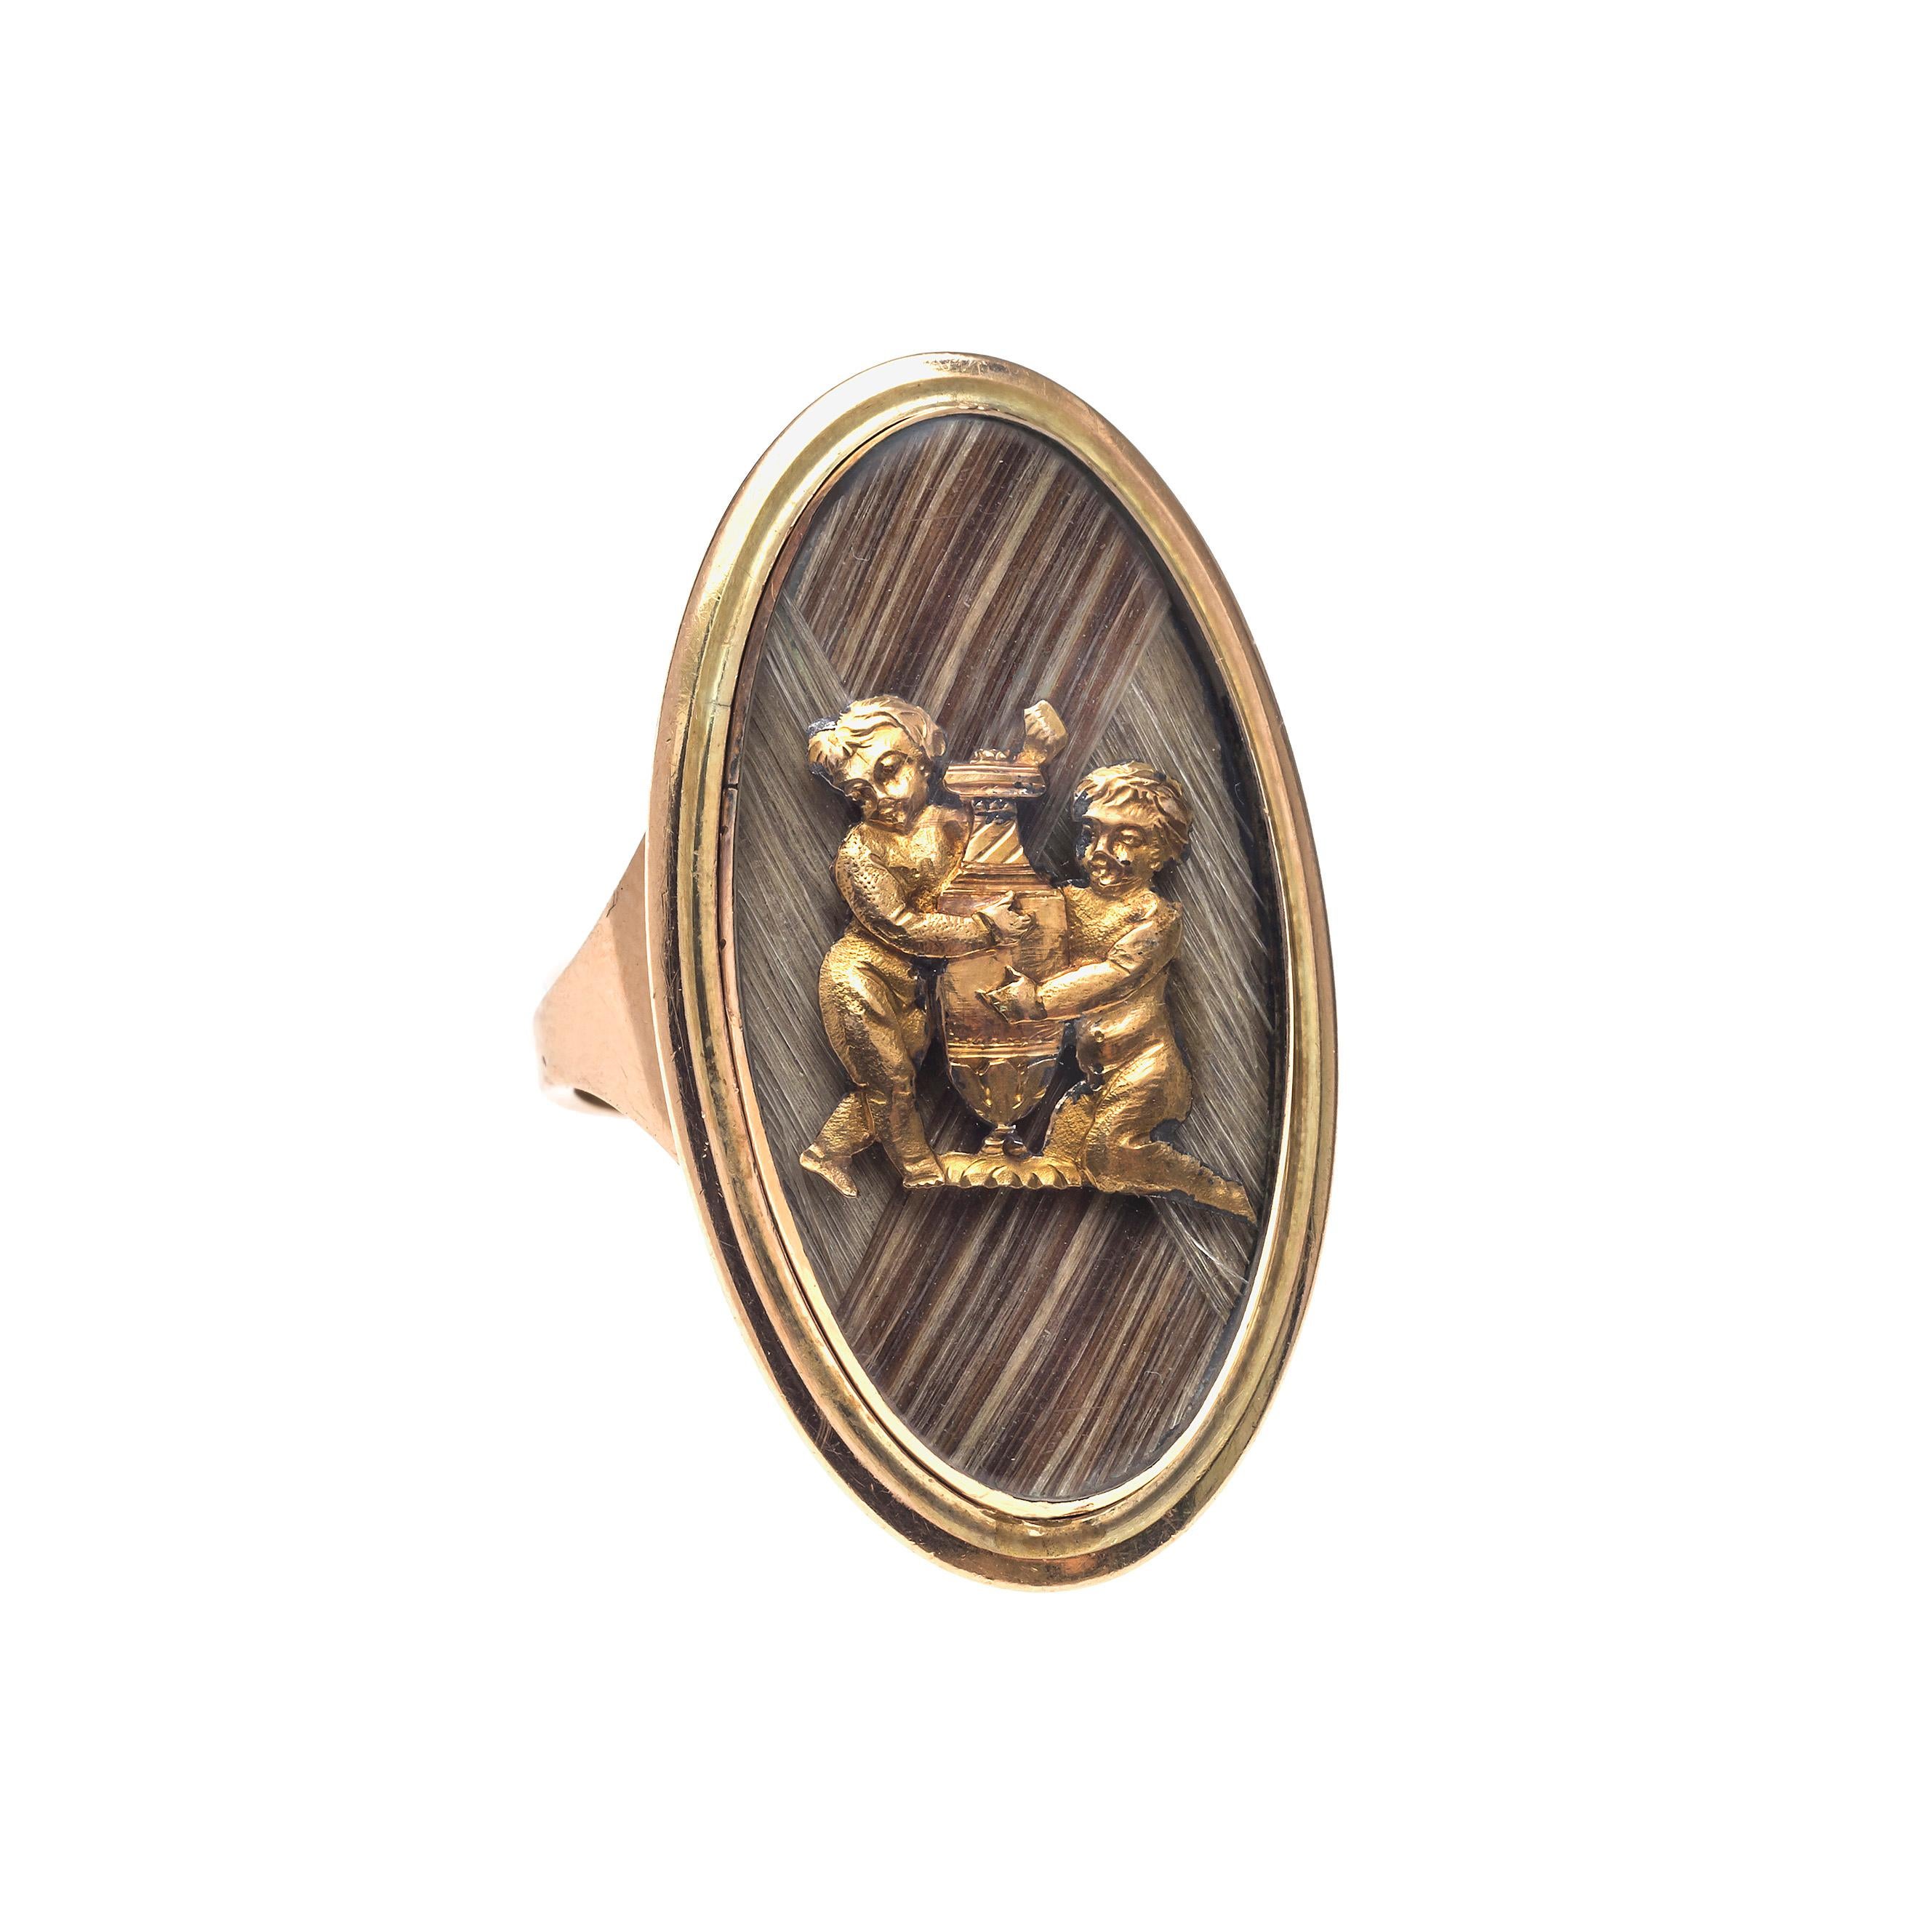 The oval 14K gold ring is typical of the style of the last decade of the 18th century. Two different kinds of hair have been interwoven and decorated with two finely engraved golden putti that are embracing an amphora. The ring is most likely the